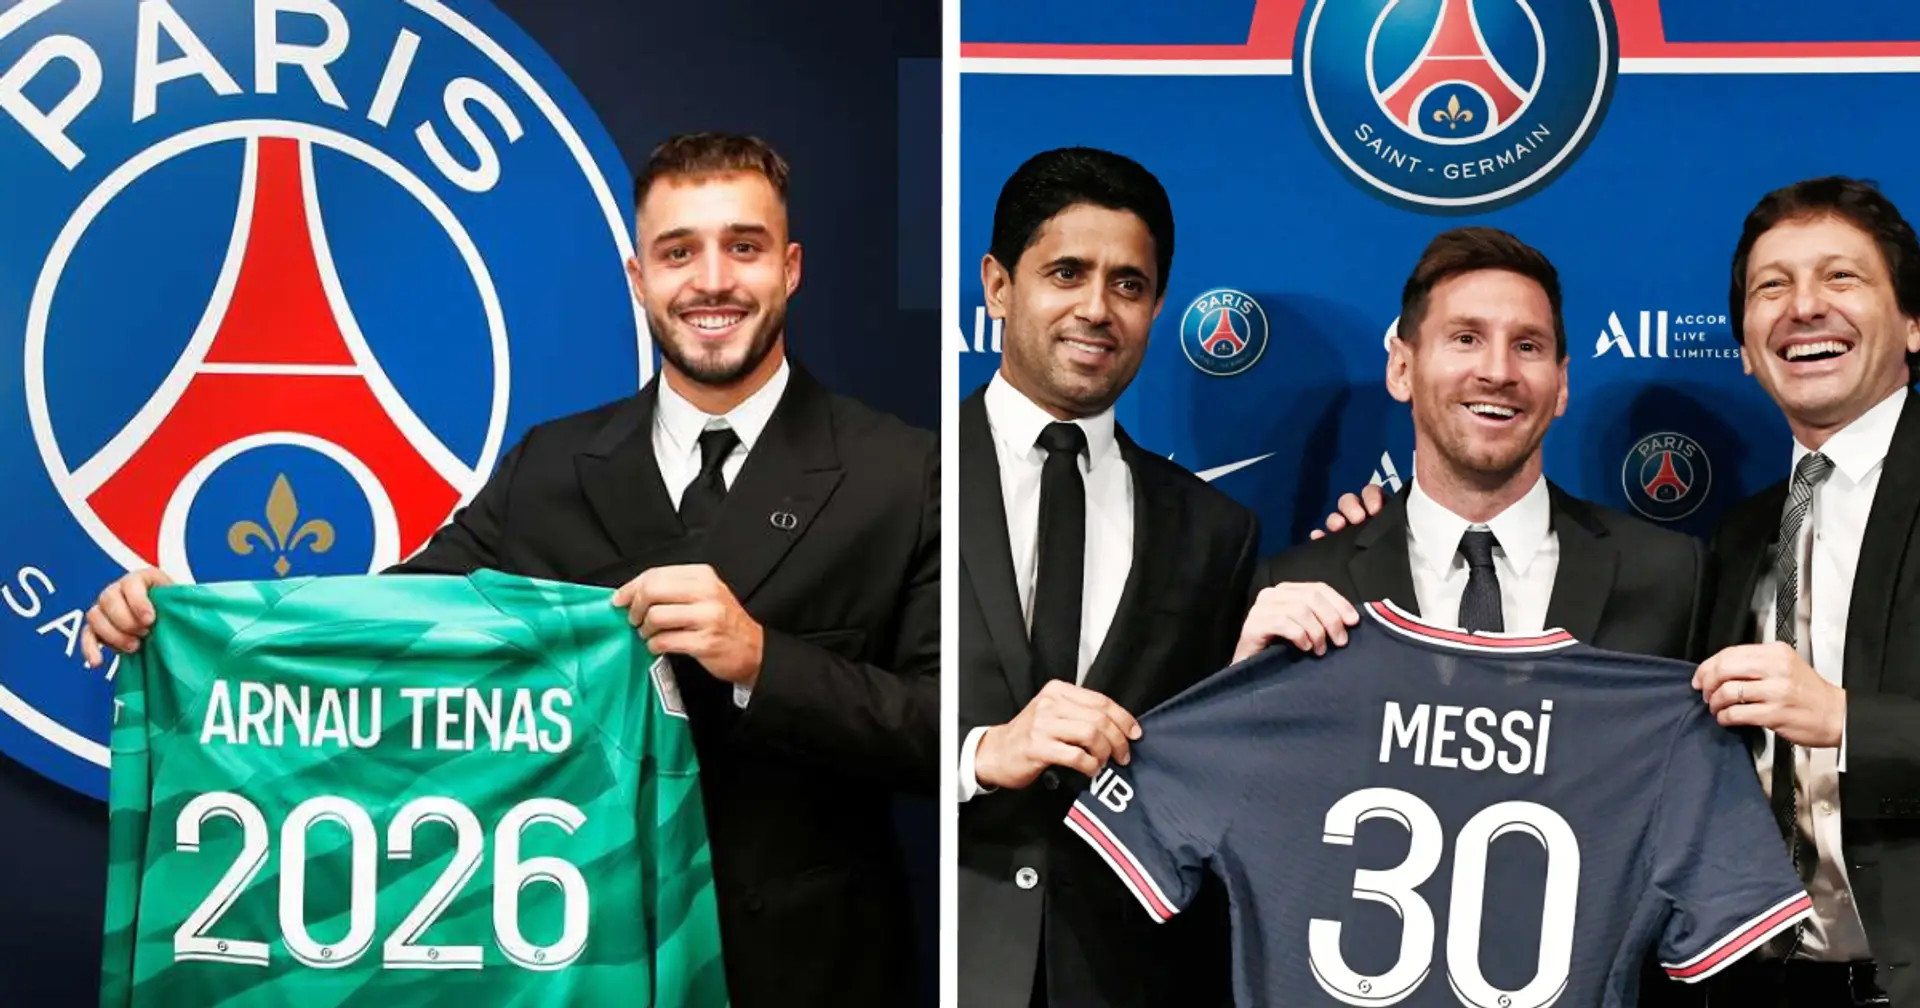 10 players who have left Barca for PSG in recent years